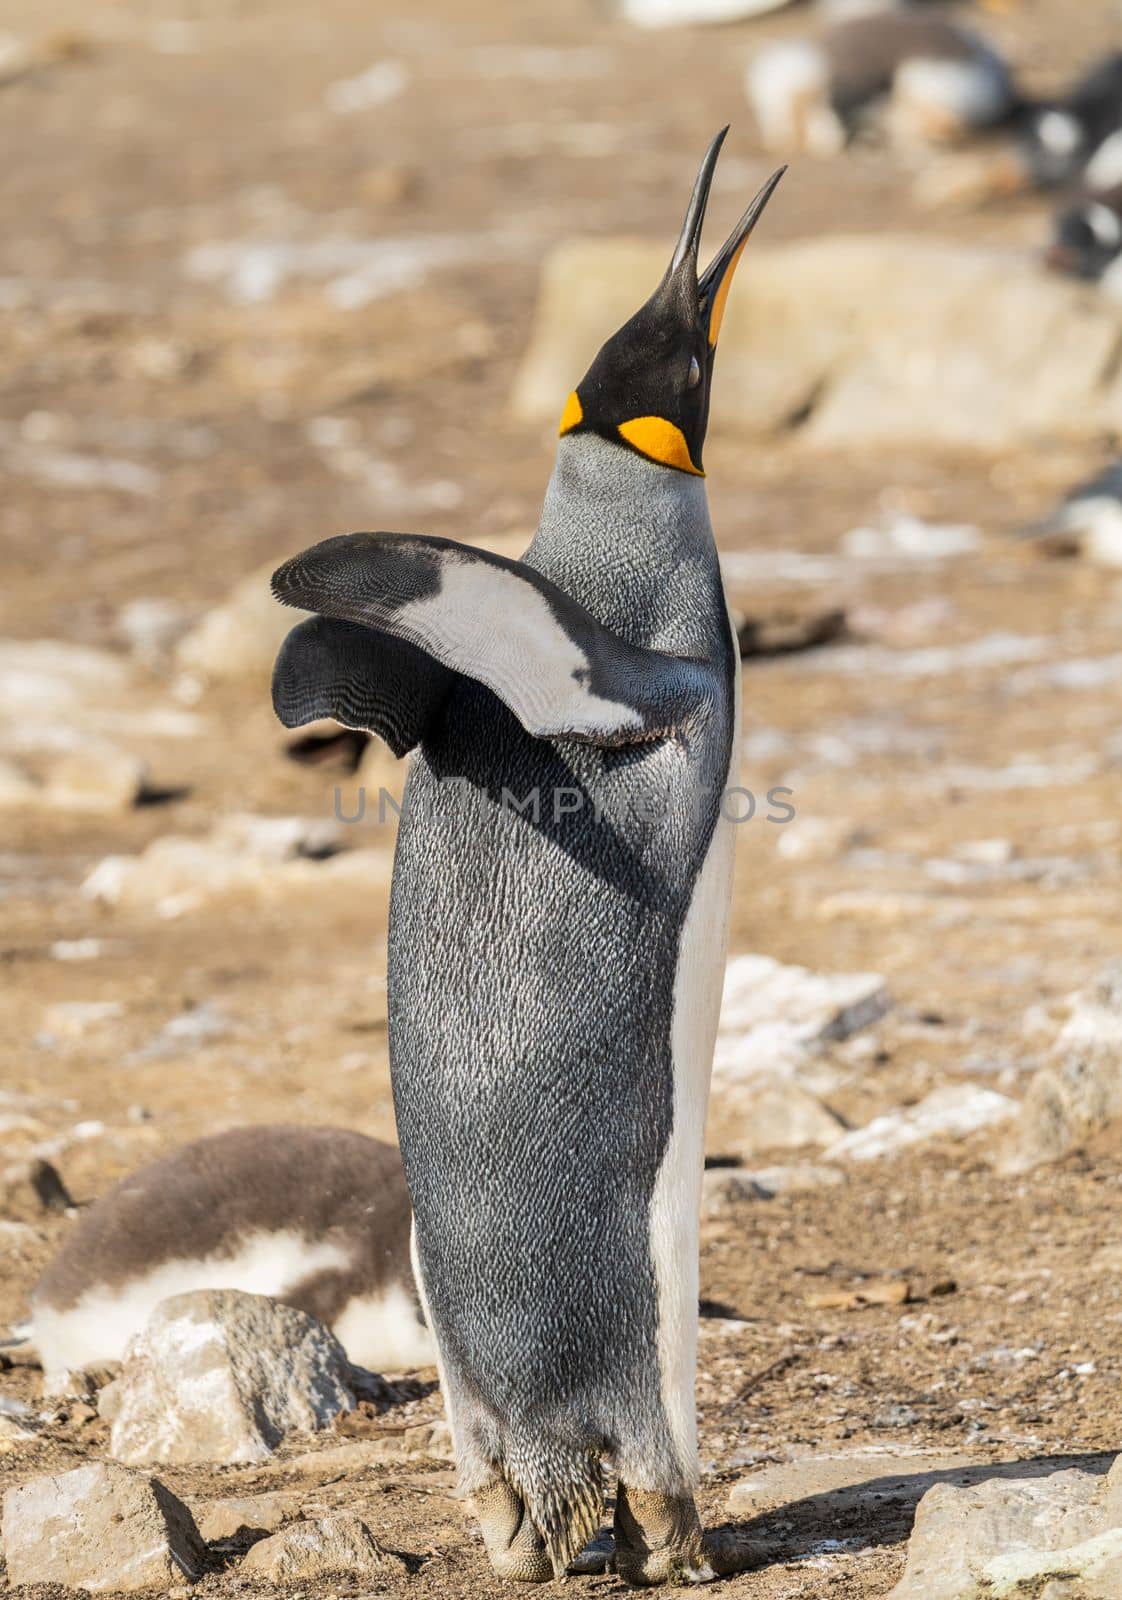 King Penguin standing erect at Bluff Cove calling to others by steheap